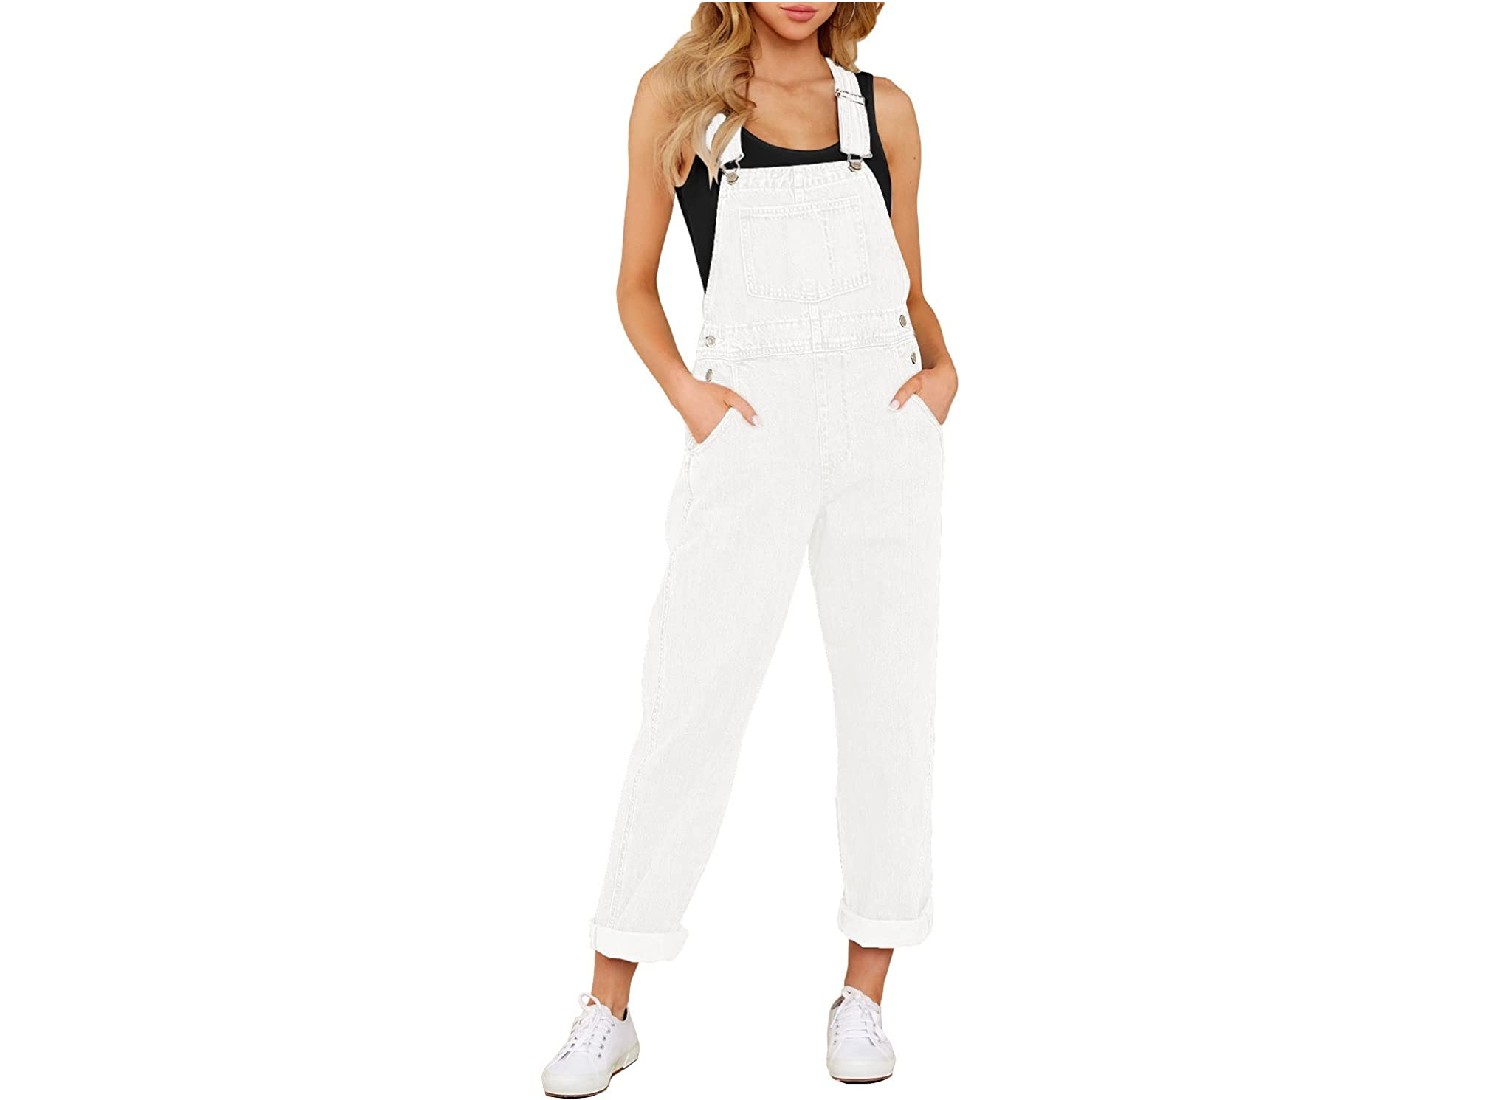 A model wearing a pair of white overalls.